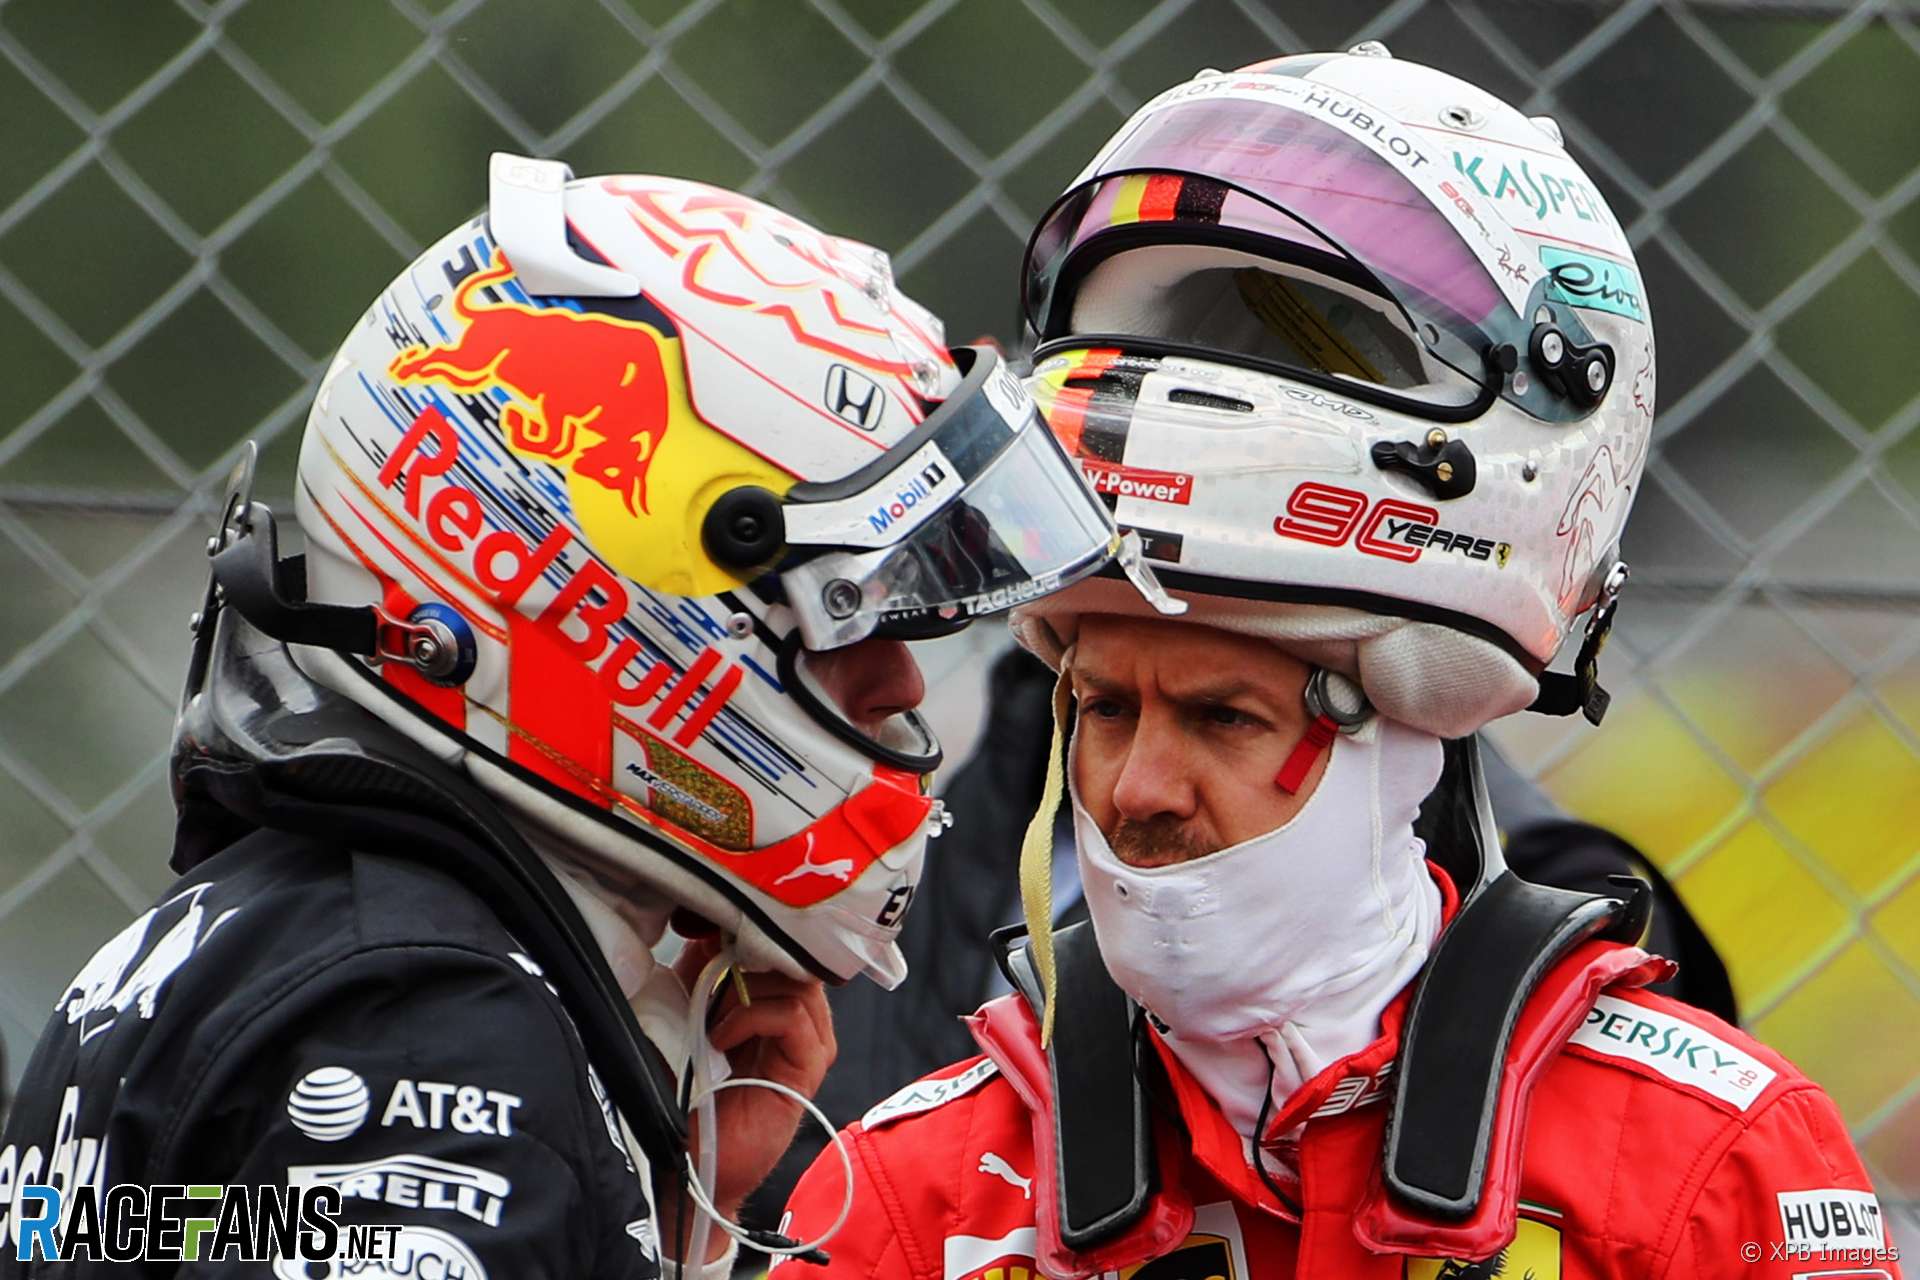 Apology means more than stewards’ decision – Vettel